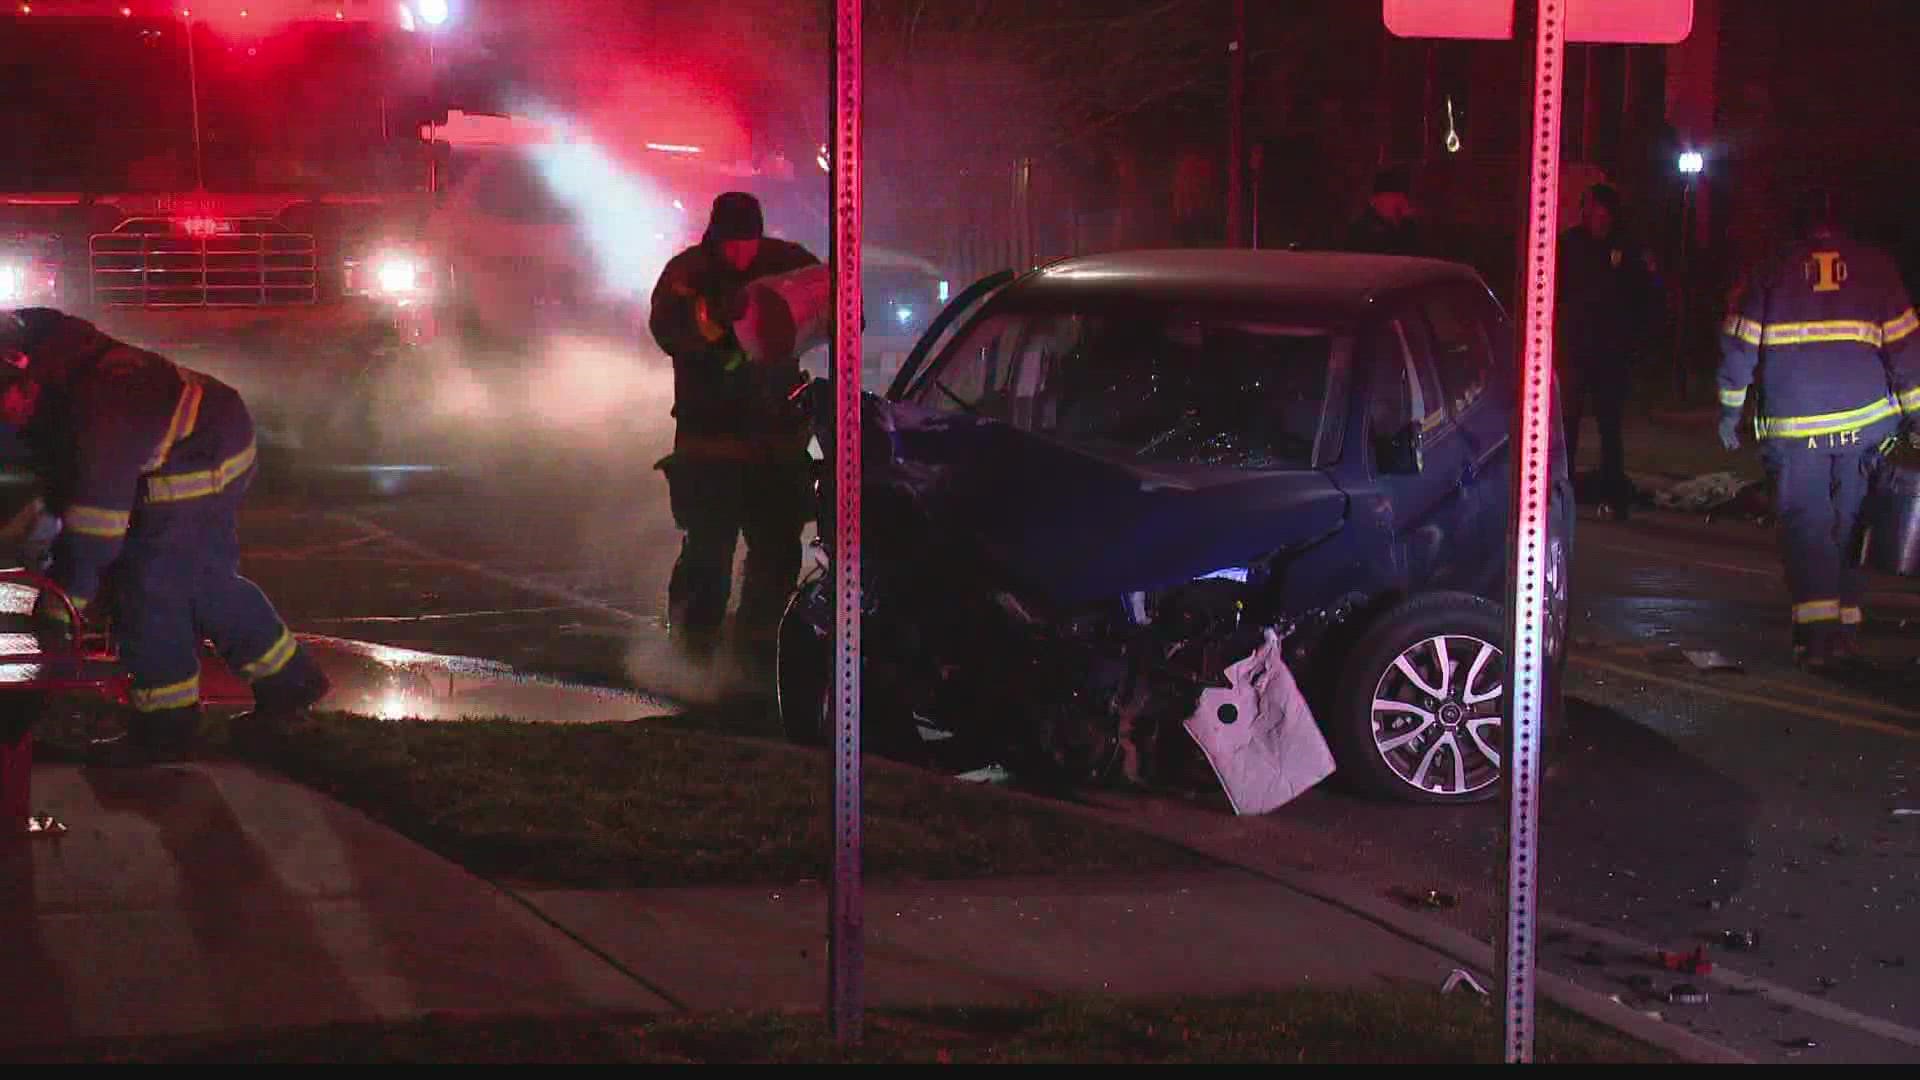 The crash happened around 2:30 a.m. on Friday near the intersection of Central Avenue and East 19th Street.